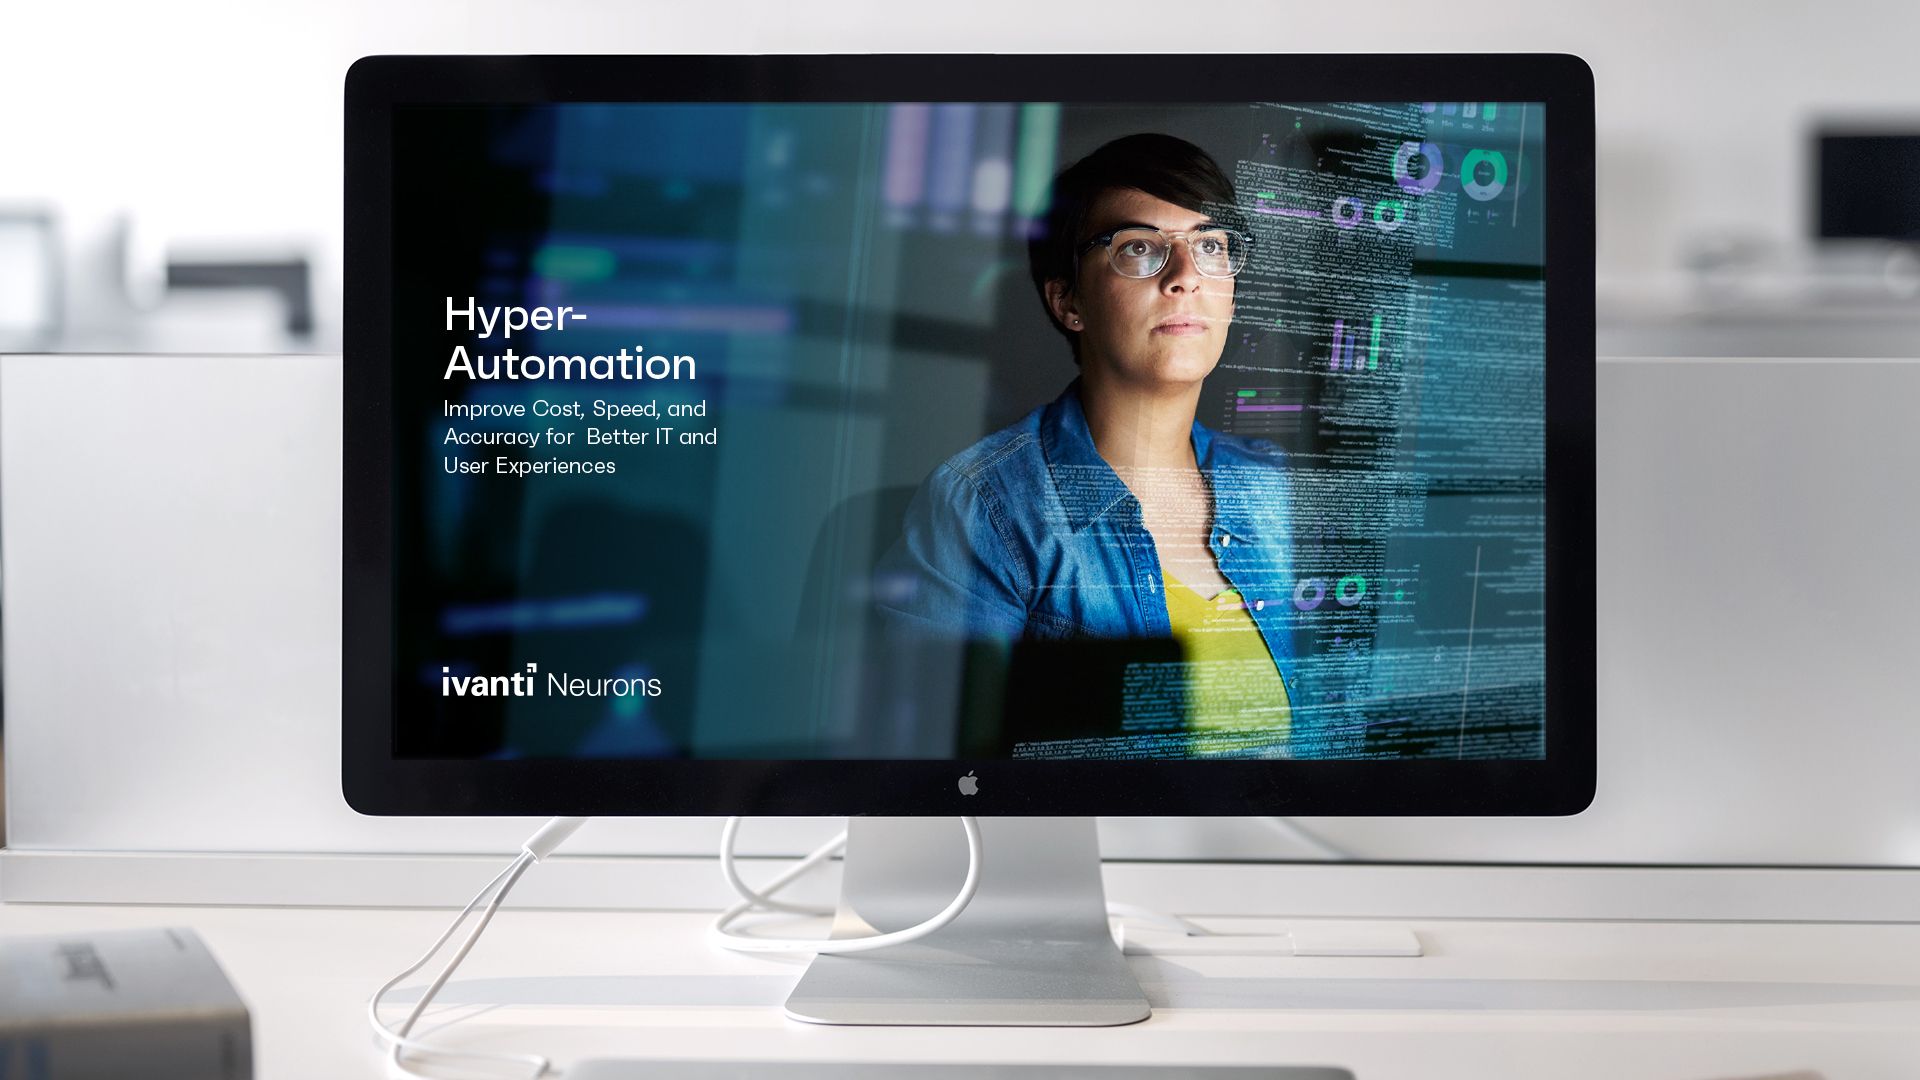 Improving IT and user experience with hyper-automation